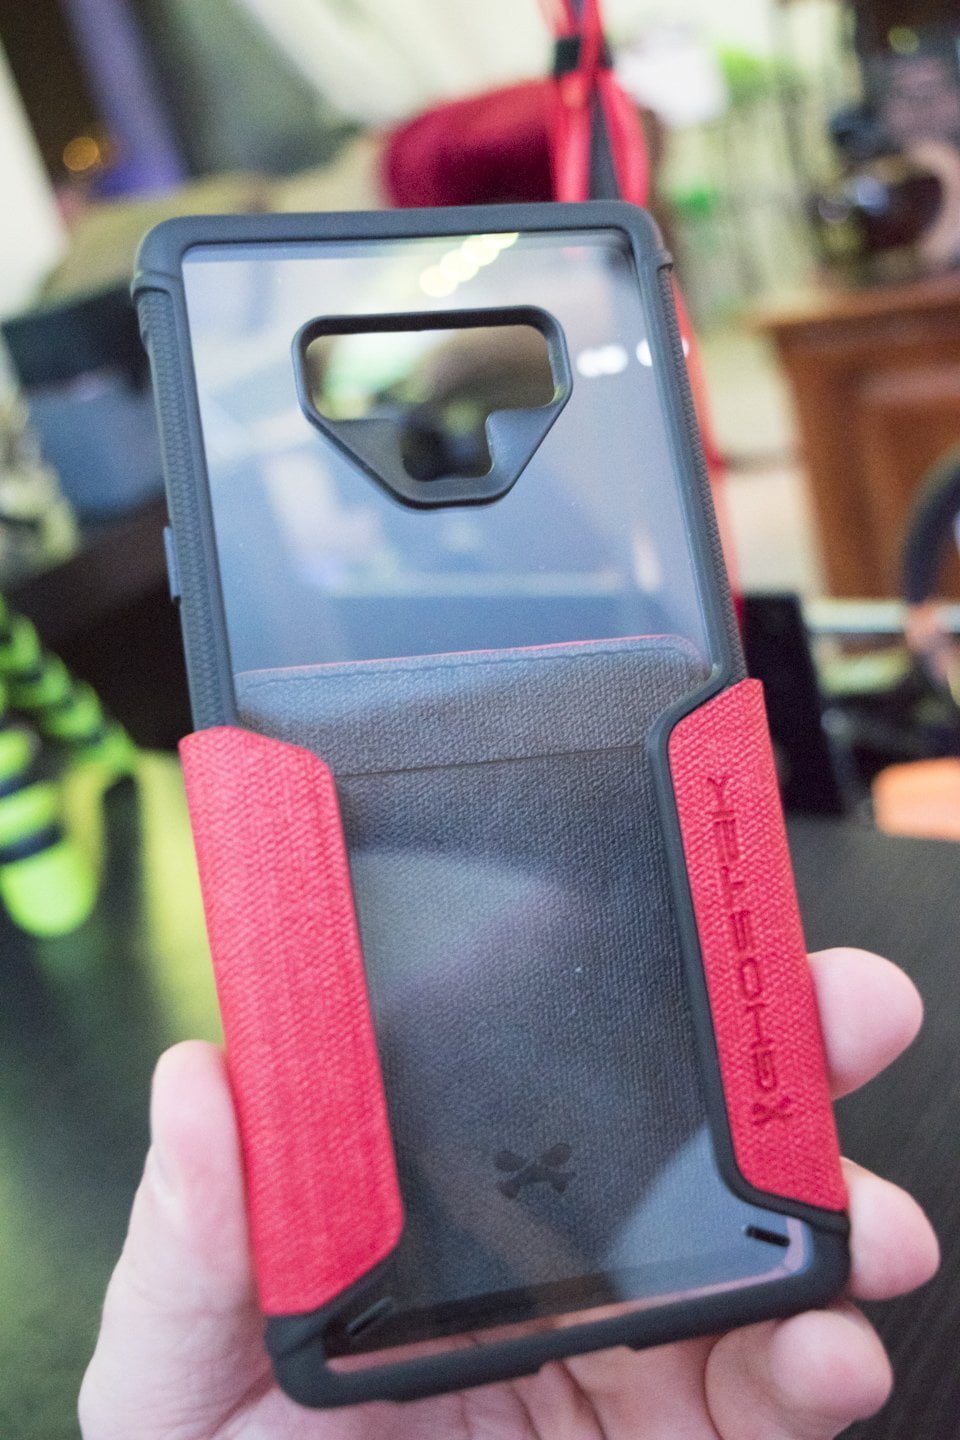 Ghostek Case Android News All Bytes Review Exec 3